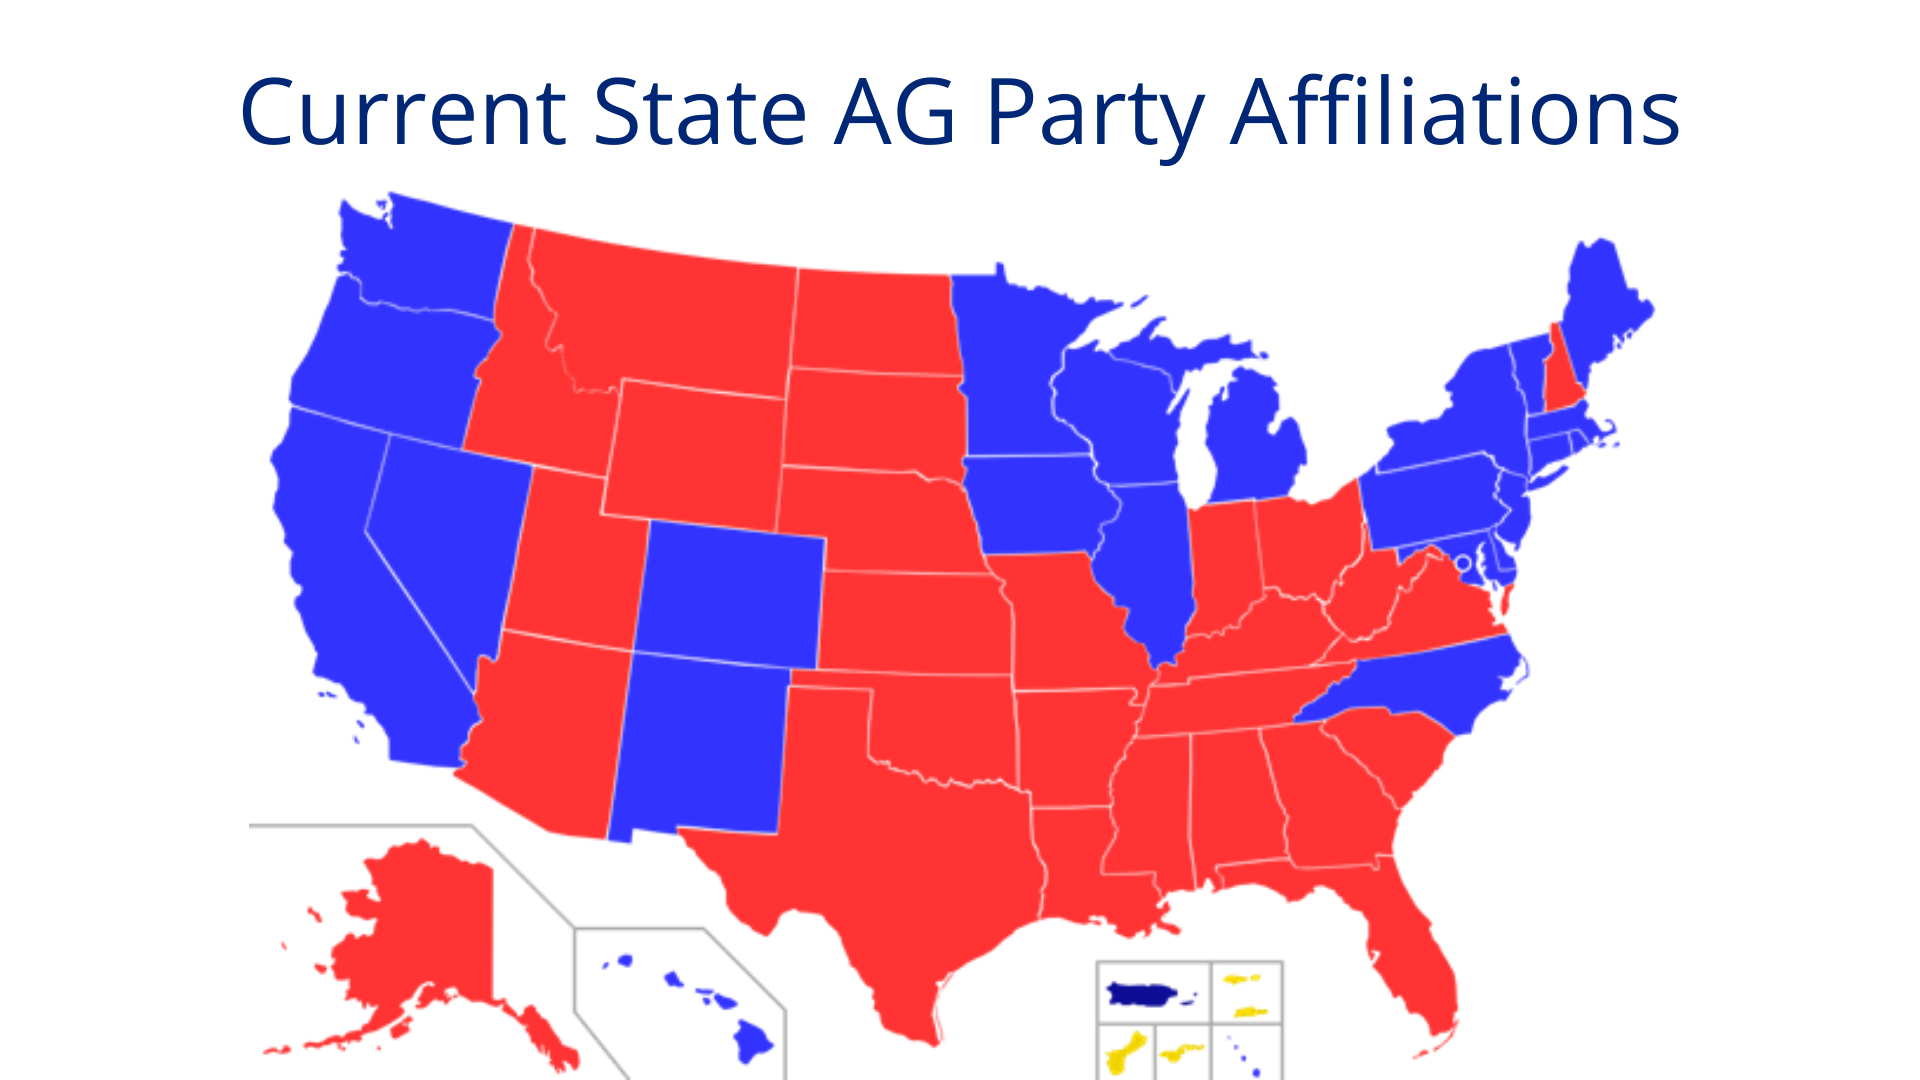 Current State Attorneys General Party Affiliation